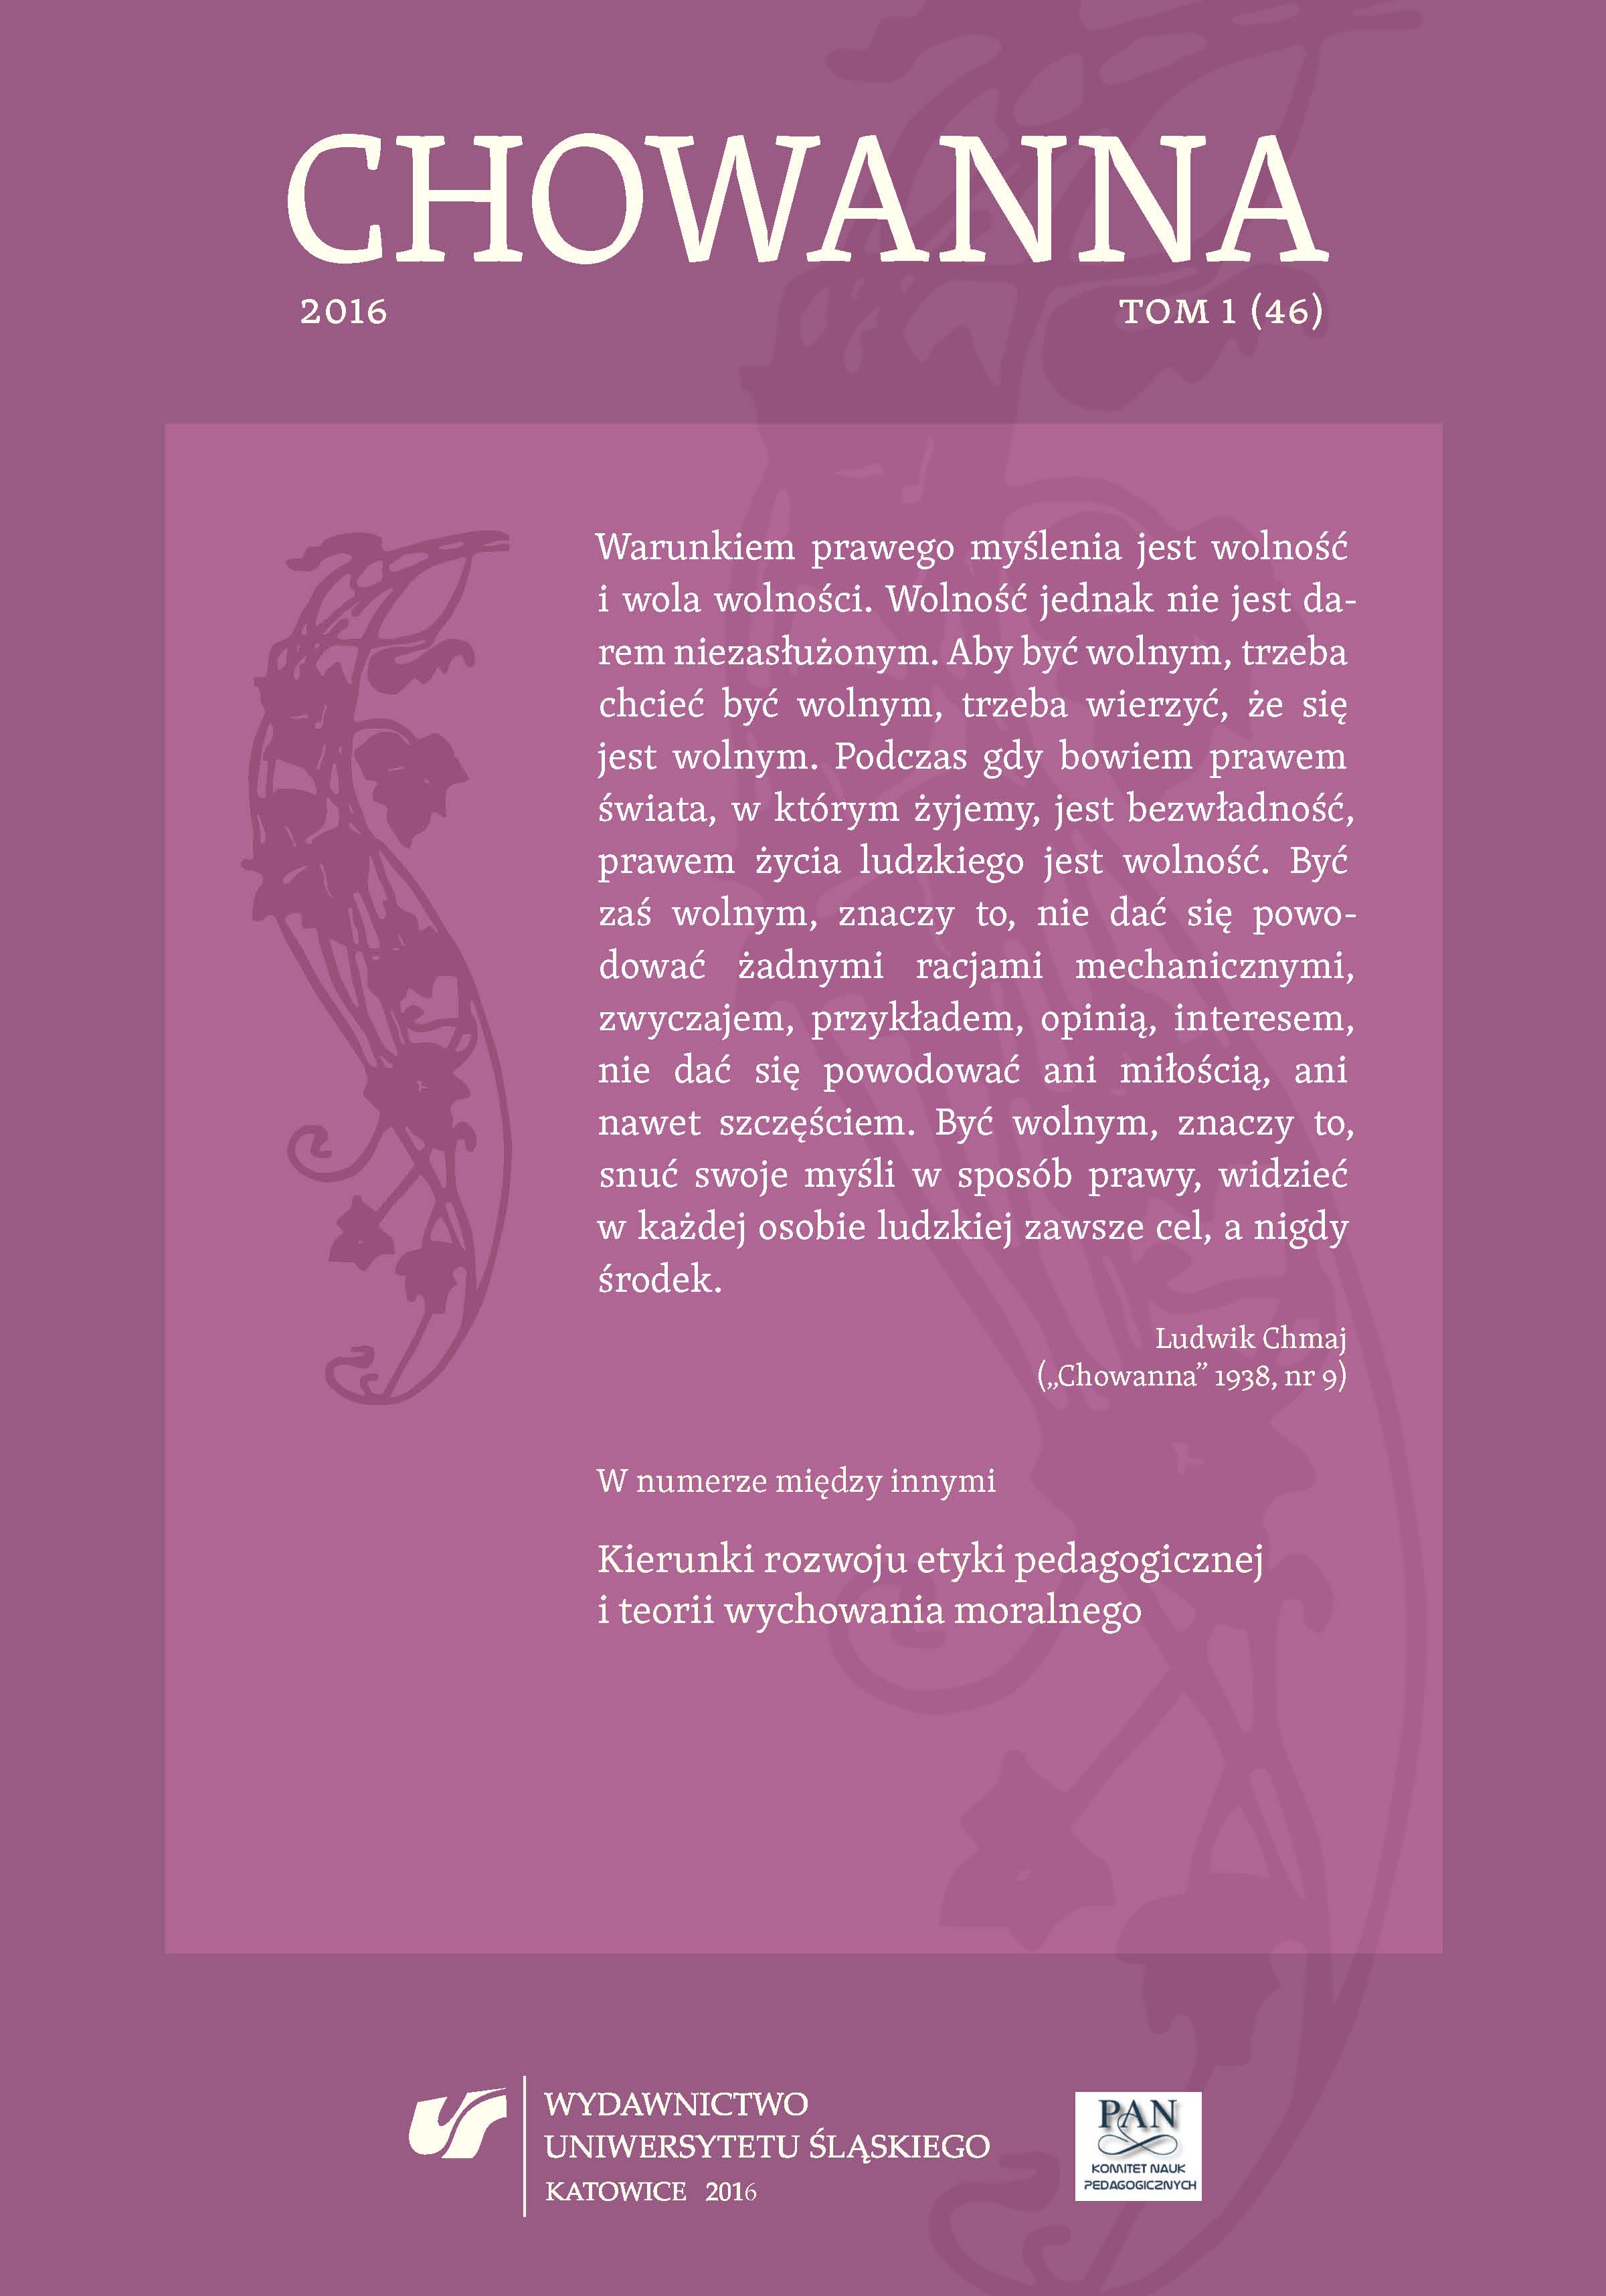 Monographic Part. Developmental Directions of Pedagogical Ethic and Theory of Moral Education (edited by Alicja Żywczok): Cheating on School Tests – Between Ethics and the Social Norms Cover Image